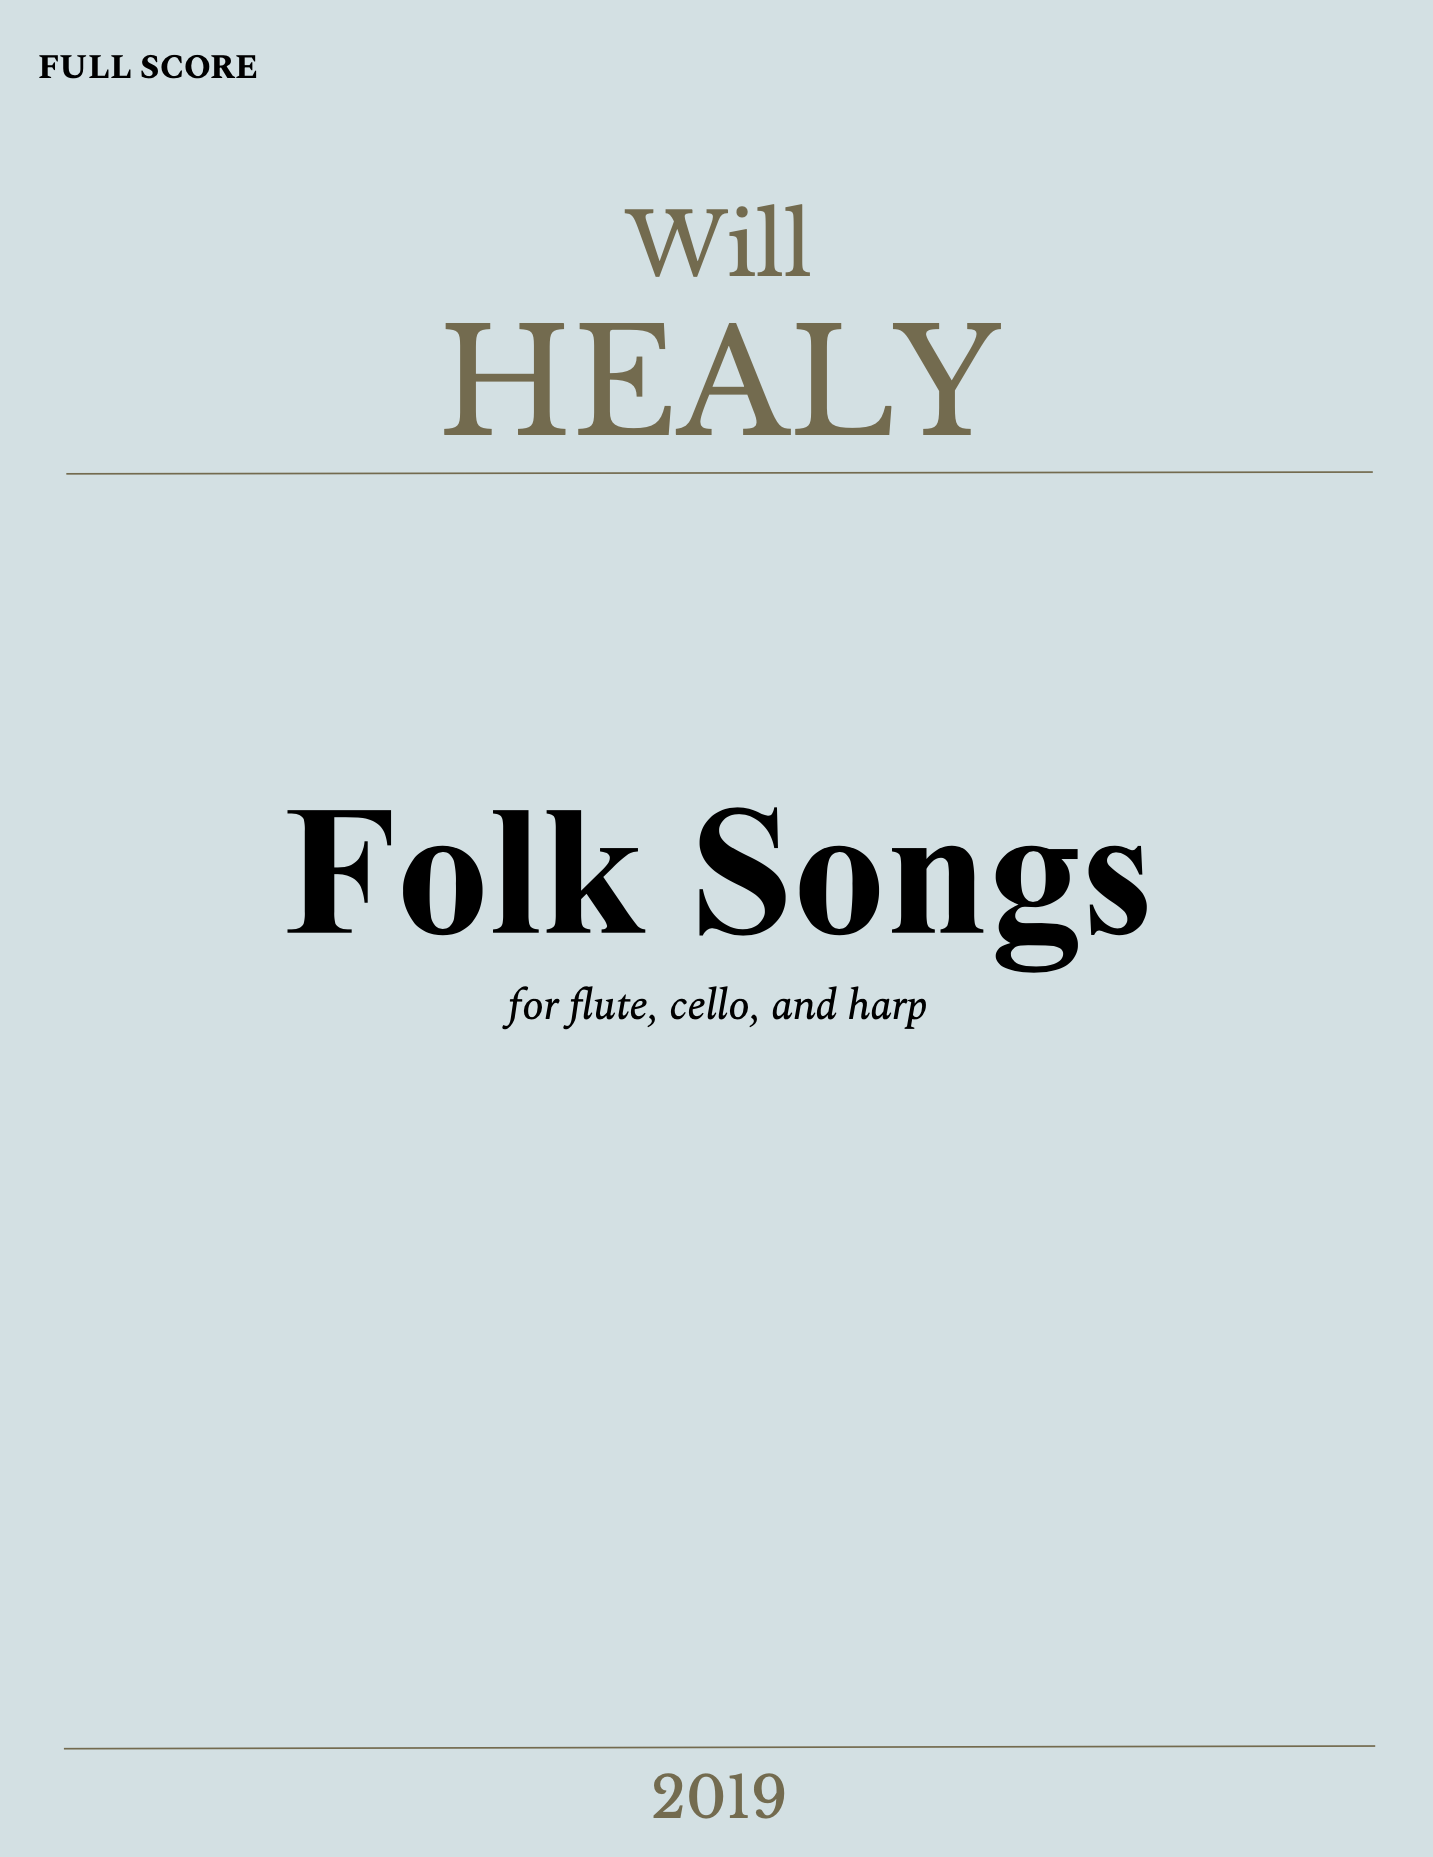 Four Folk Songs by Will Healy